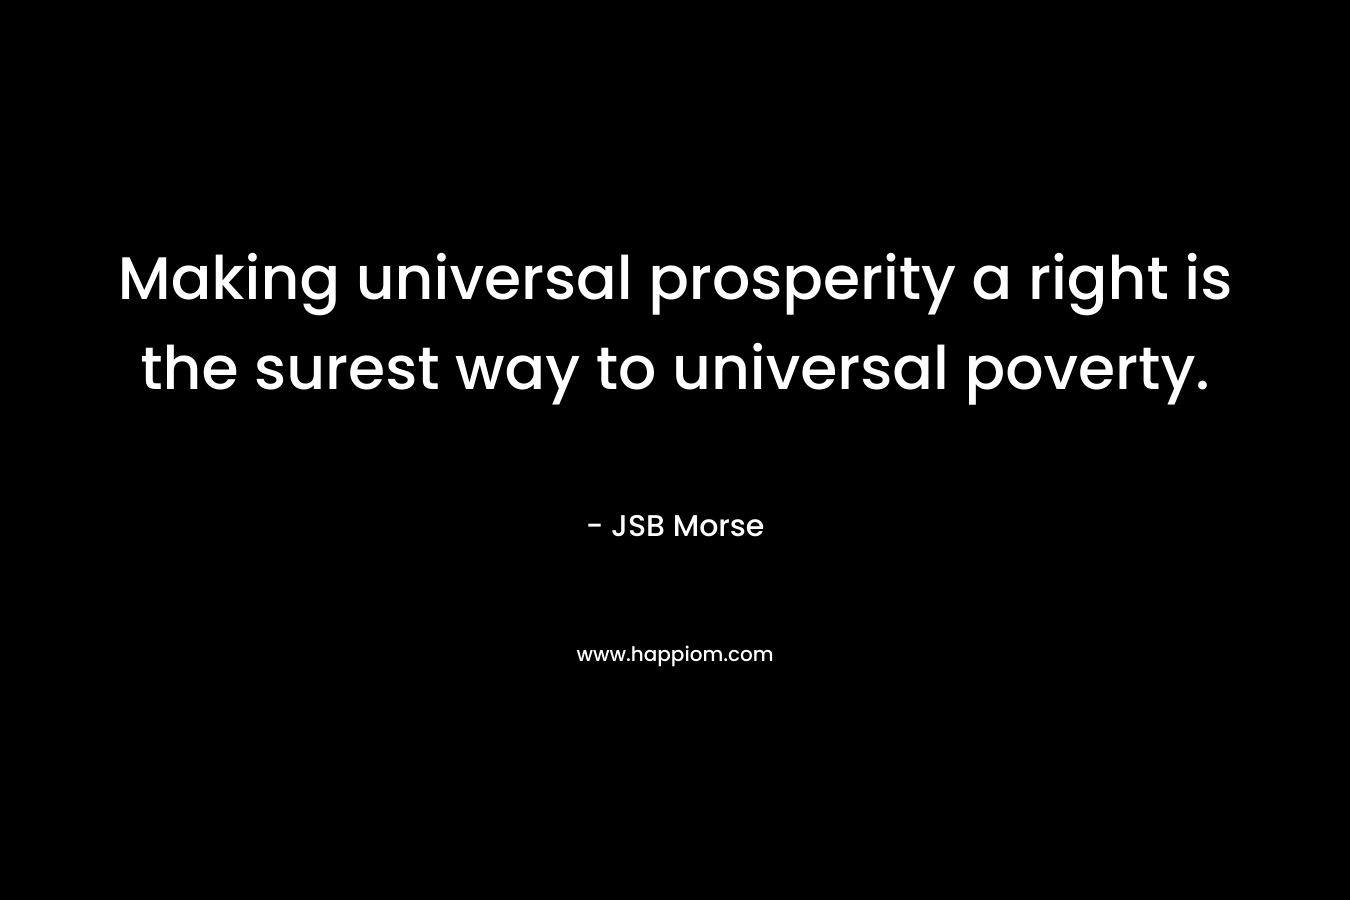 Making universal prosperity a right is the surest way to universal poverty.